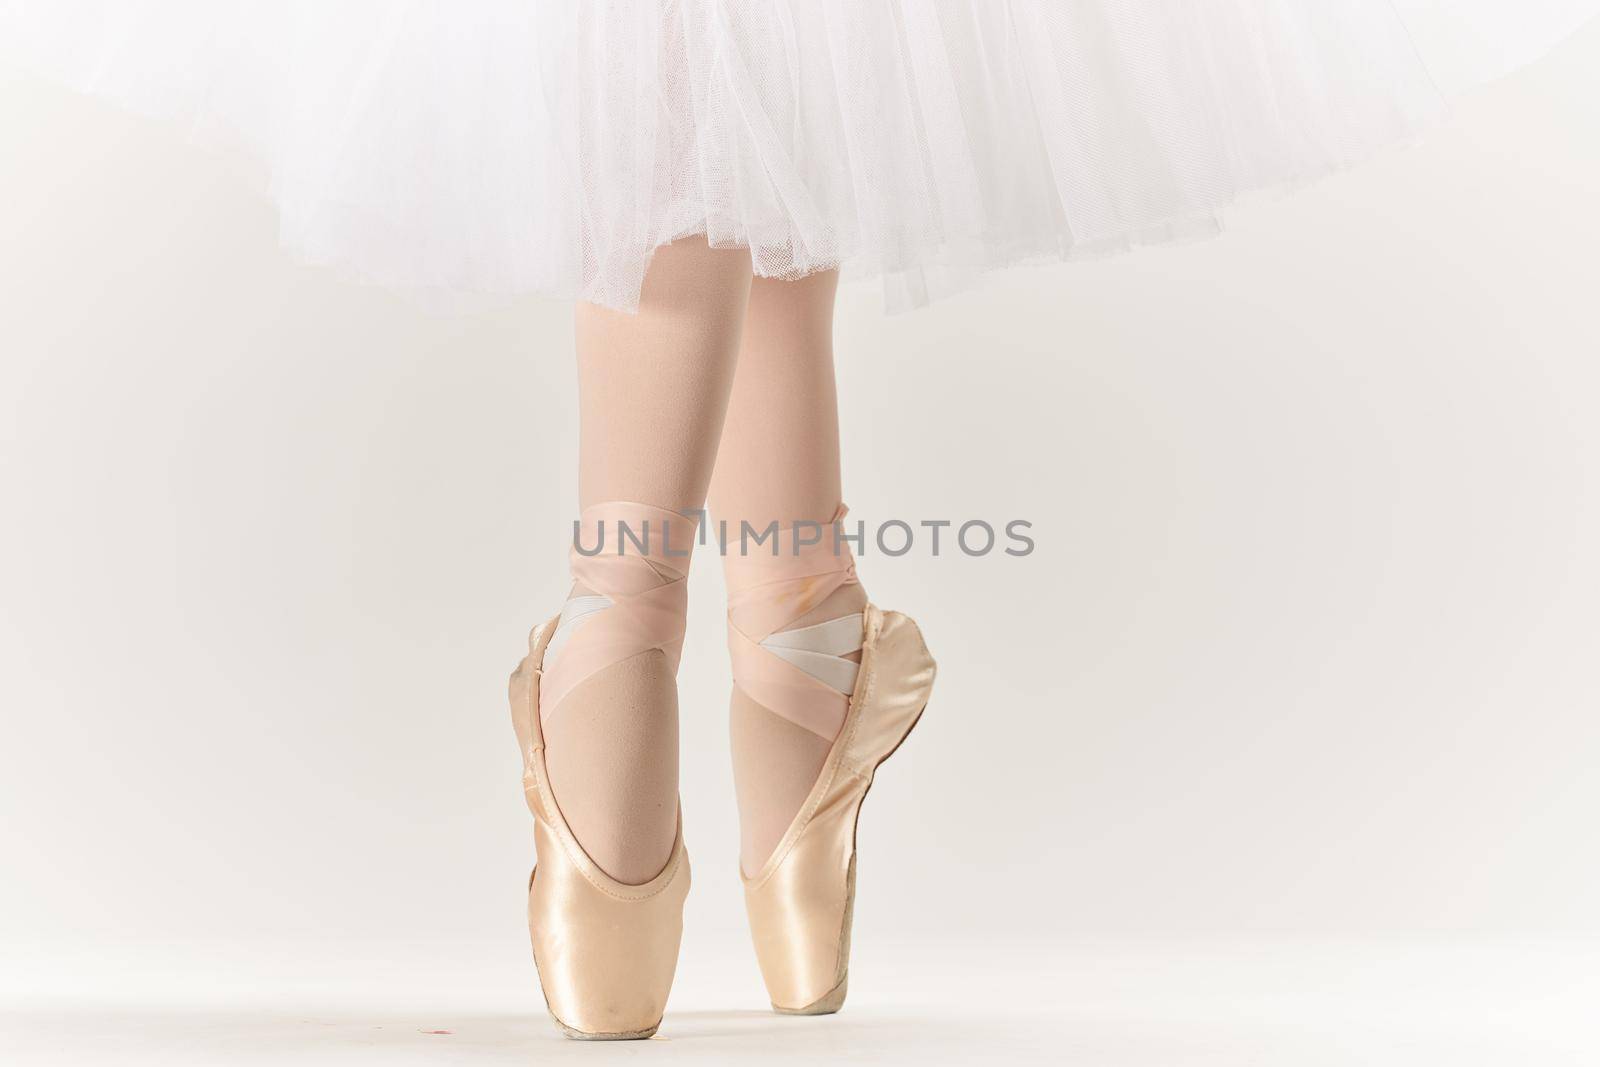 ballet shoes dance performed classical style light background. High quality photo